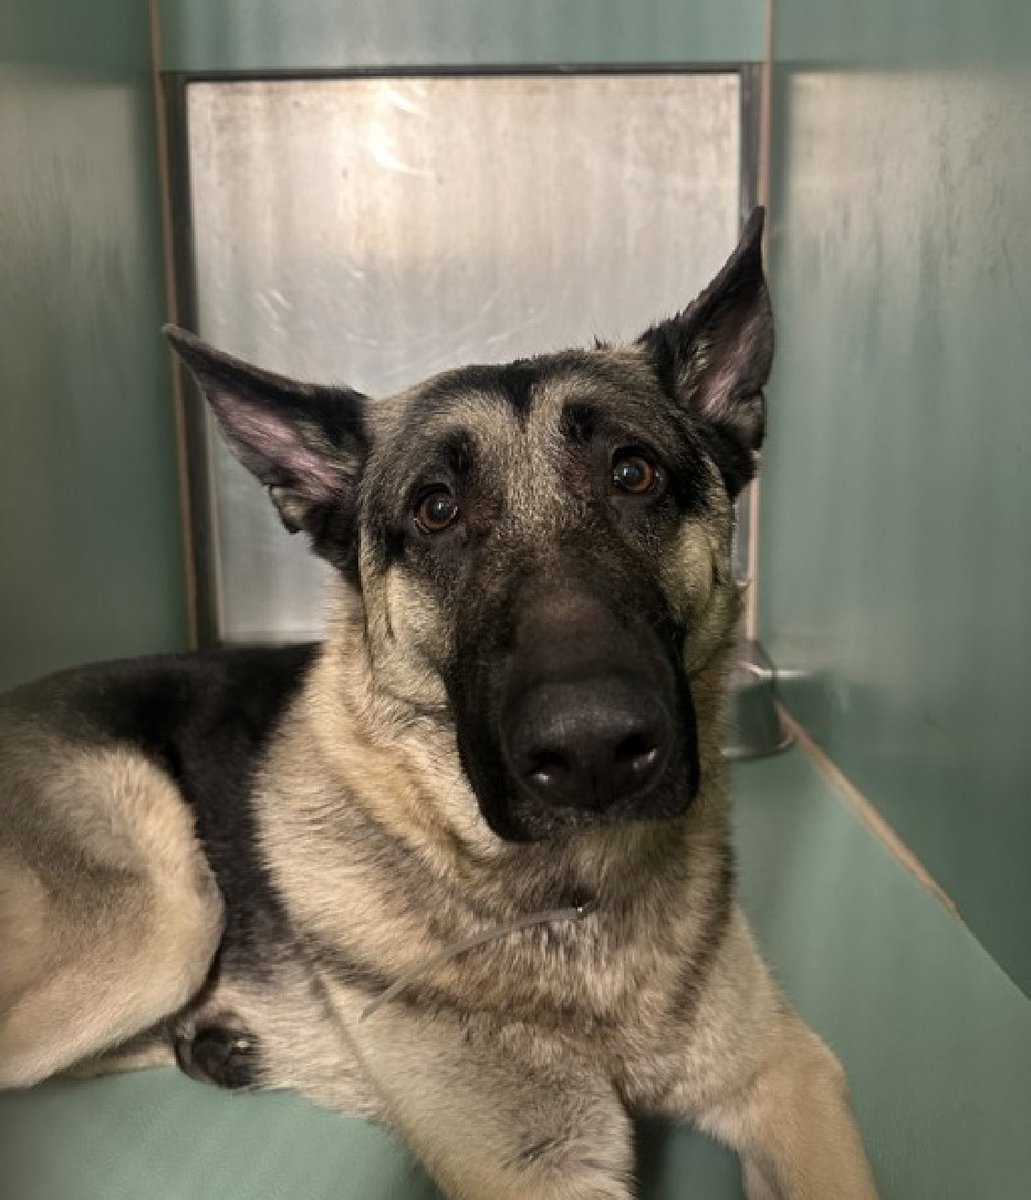 Wrenched from his home because his owner was arrested, Storm 198595 arrived April 25 and is now struggling with his loss. Pacing, spinning and whining in his kennel, this handsome 3 year old is anxious and TBK Saturday in NYCACC. A dog who's in distress and in need of help before…